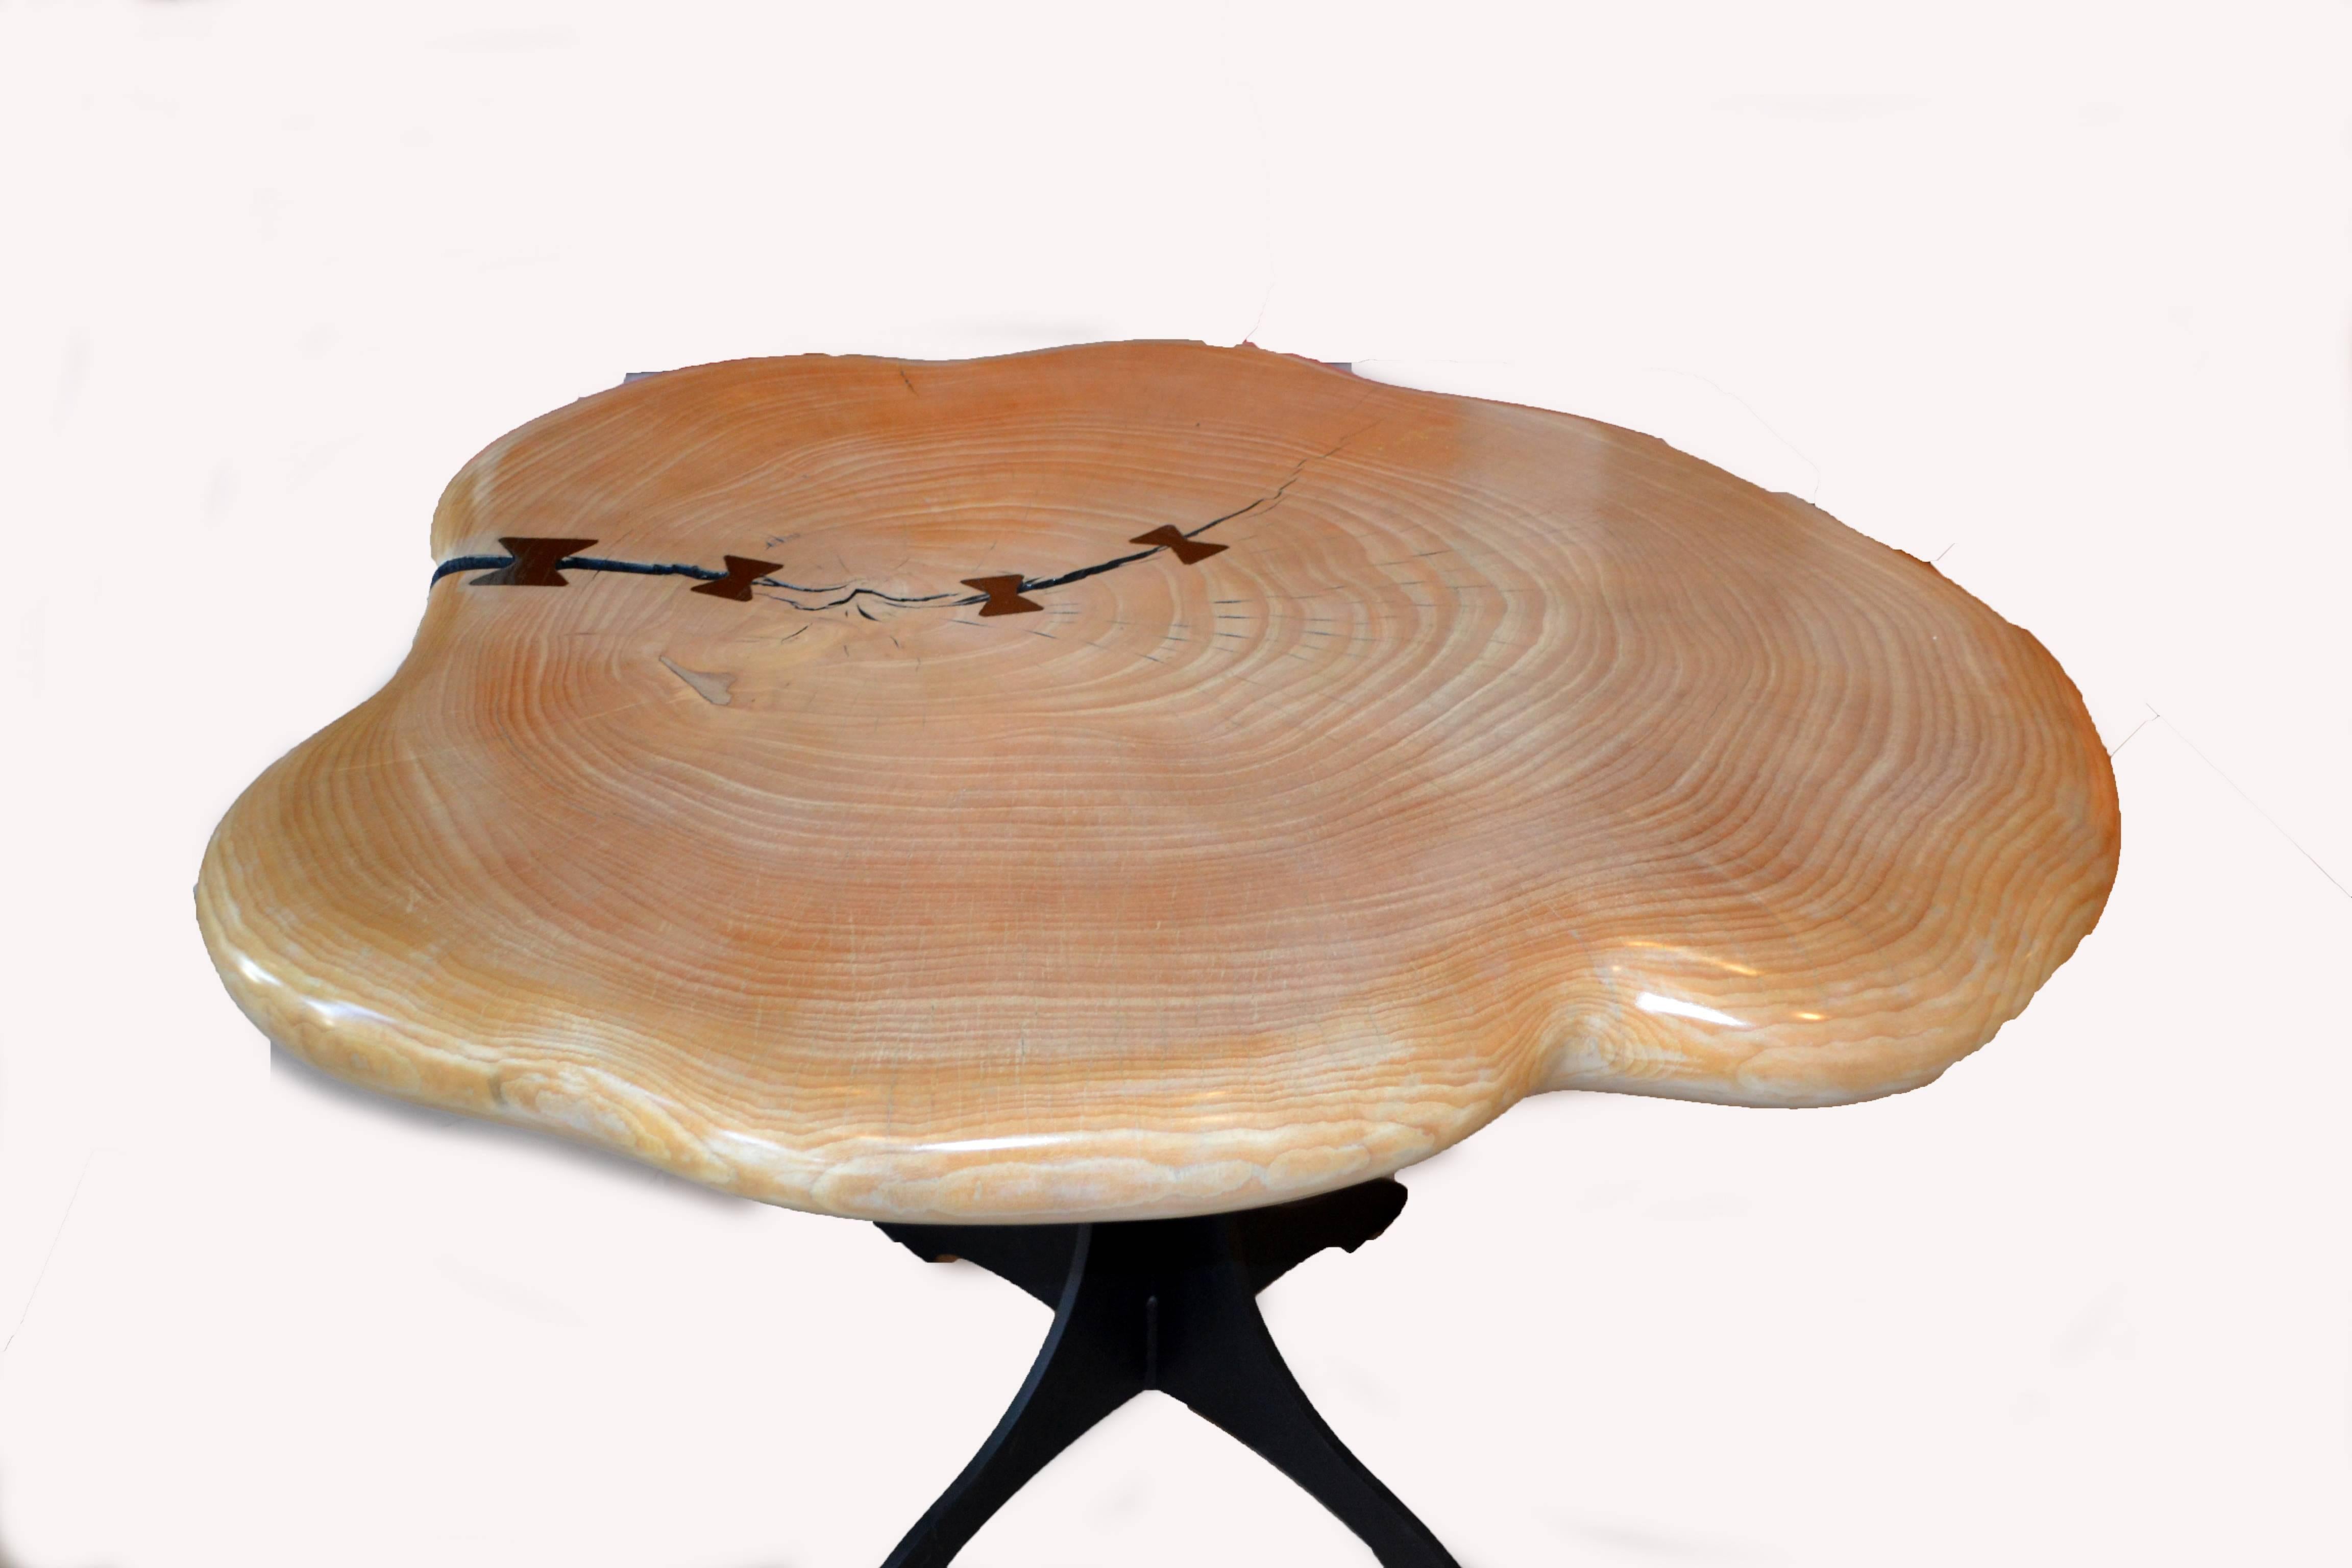 Artist Daniel Pollock is both highly respected and coveted for his amazing one of a kind sculptural furniture designs. Each of his creations are true works of art. This beautiful white ash centre table is from the artist's collection of Mid-Century